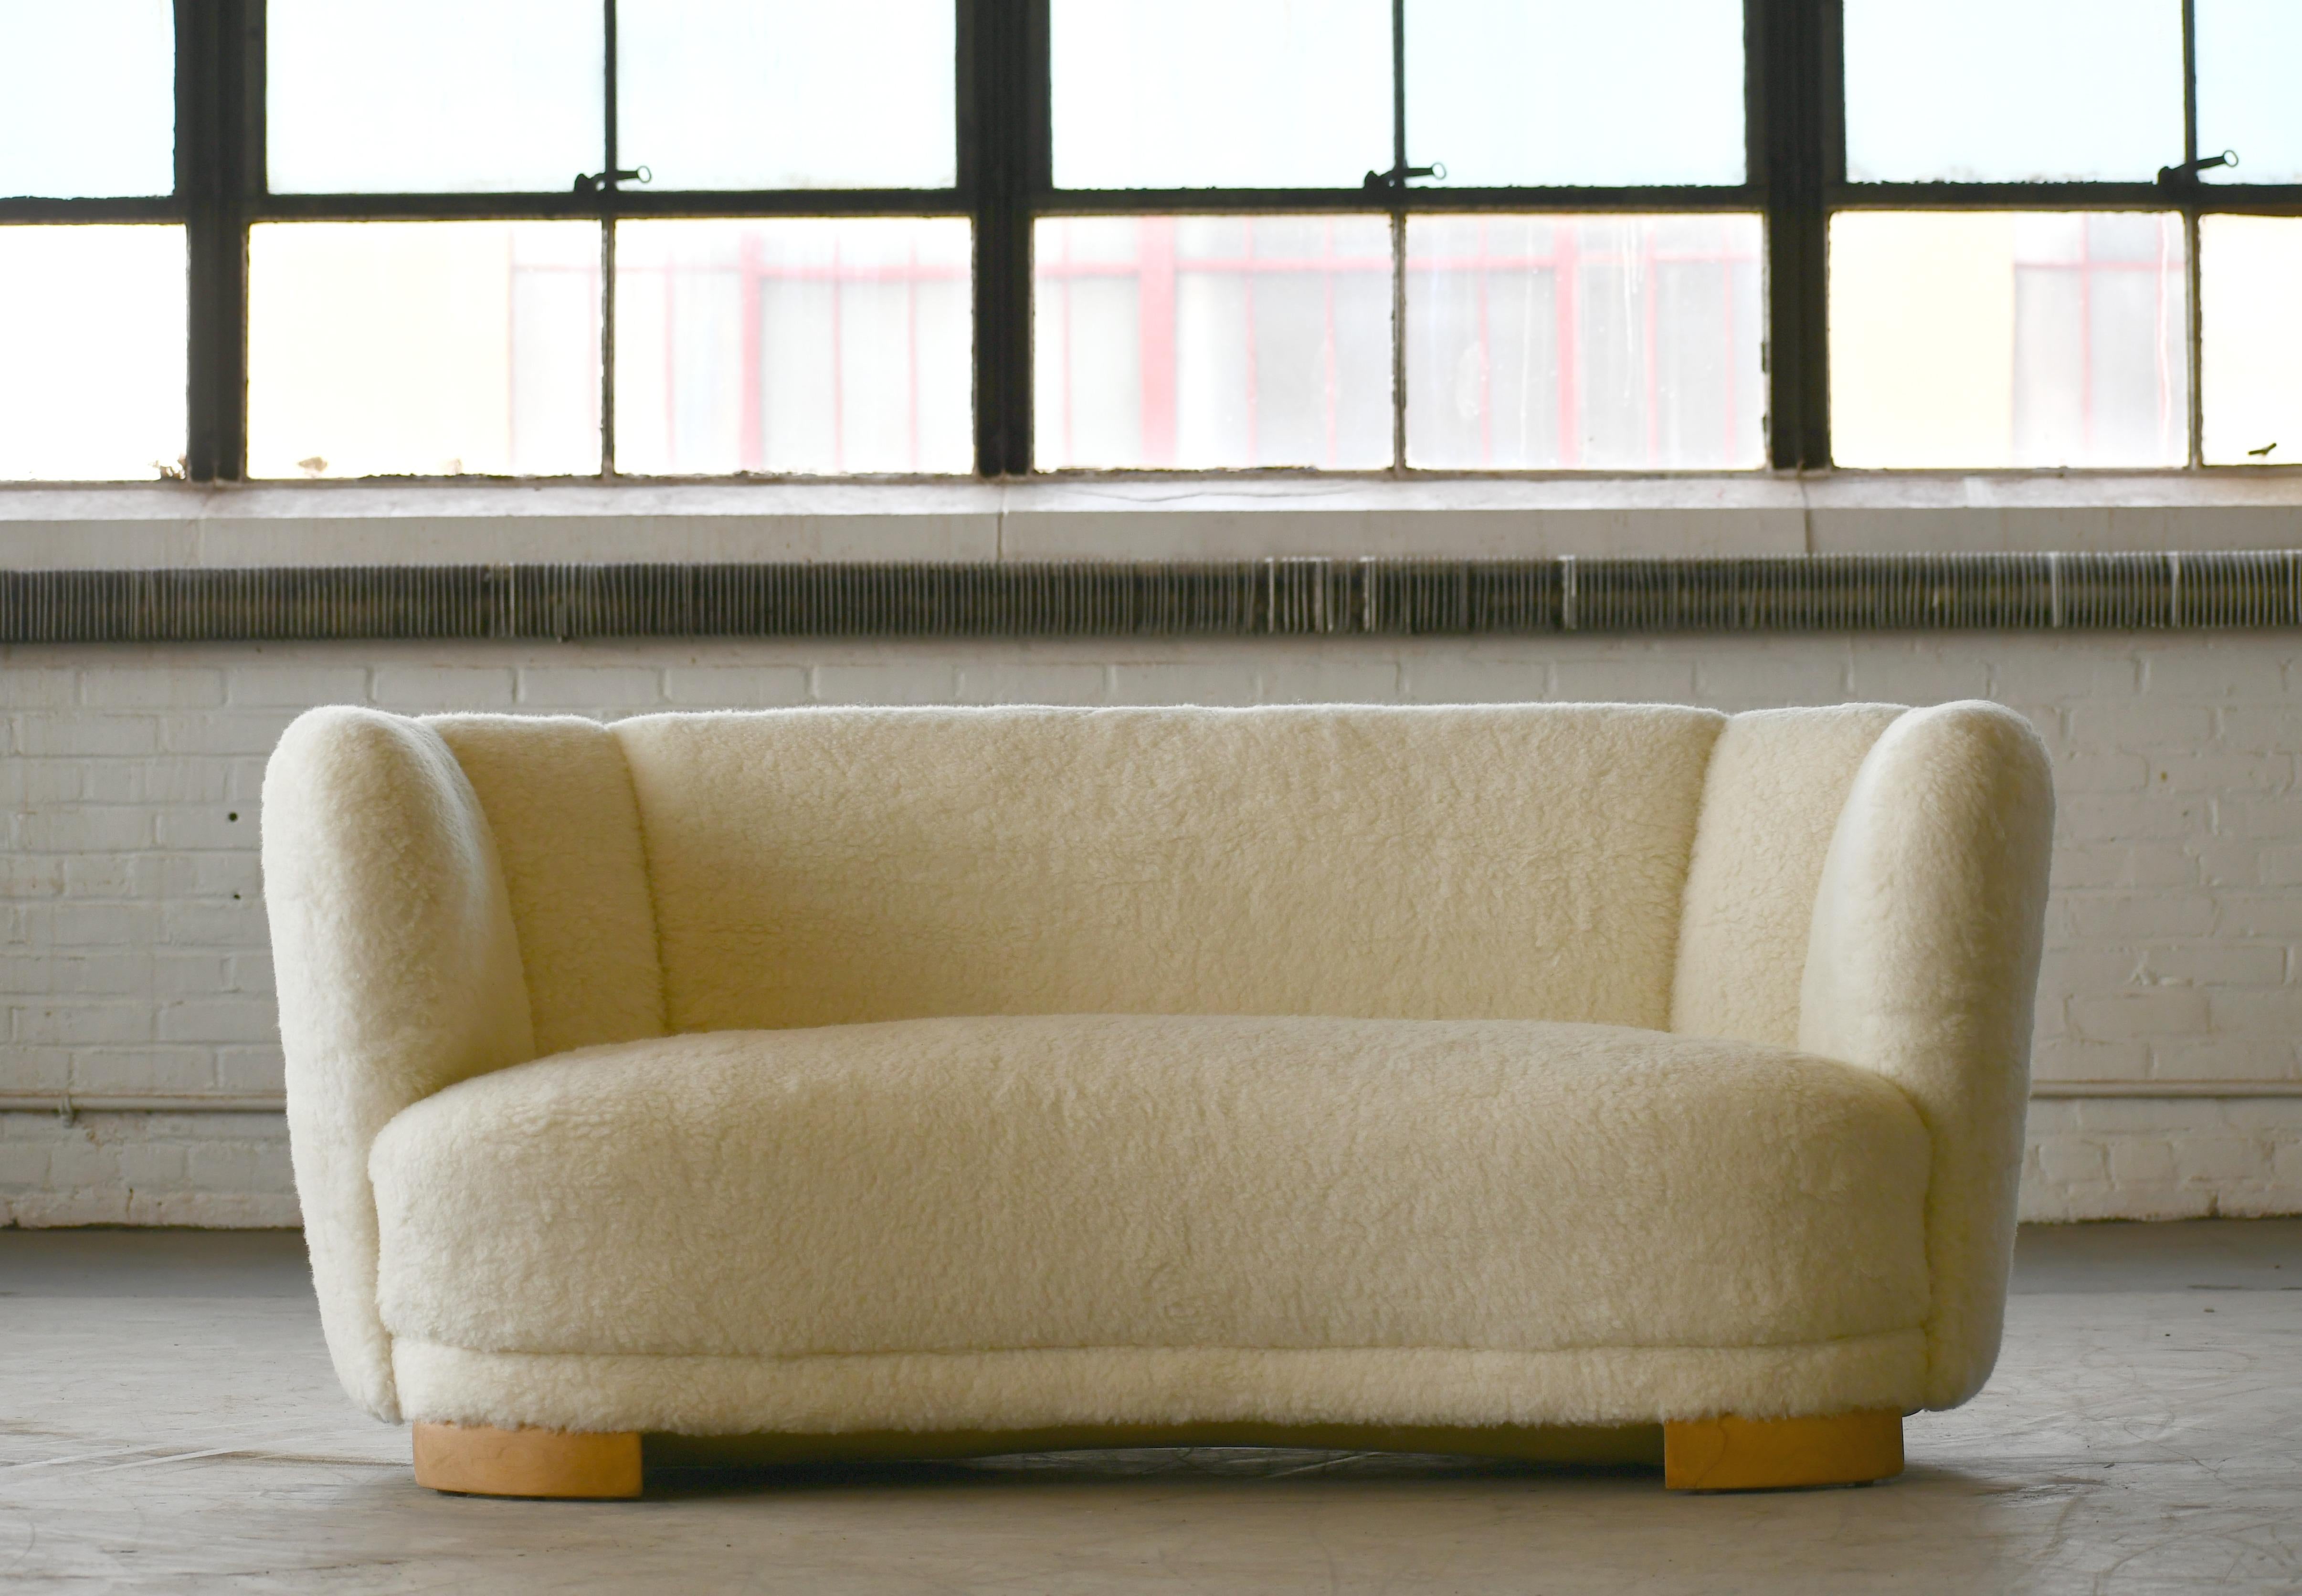 This sofa is currently in transit from Denmark and will be available on or around October 1st, 2020.

Viggo Boesen style banana shaped or curved sofa reupholstered in new lambswool made by Slagelse Møbelværk in the 1940s. This sofa will make